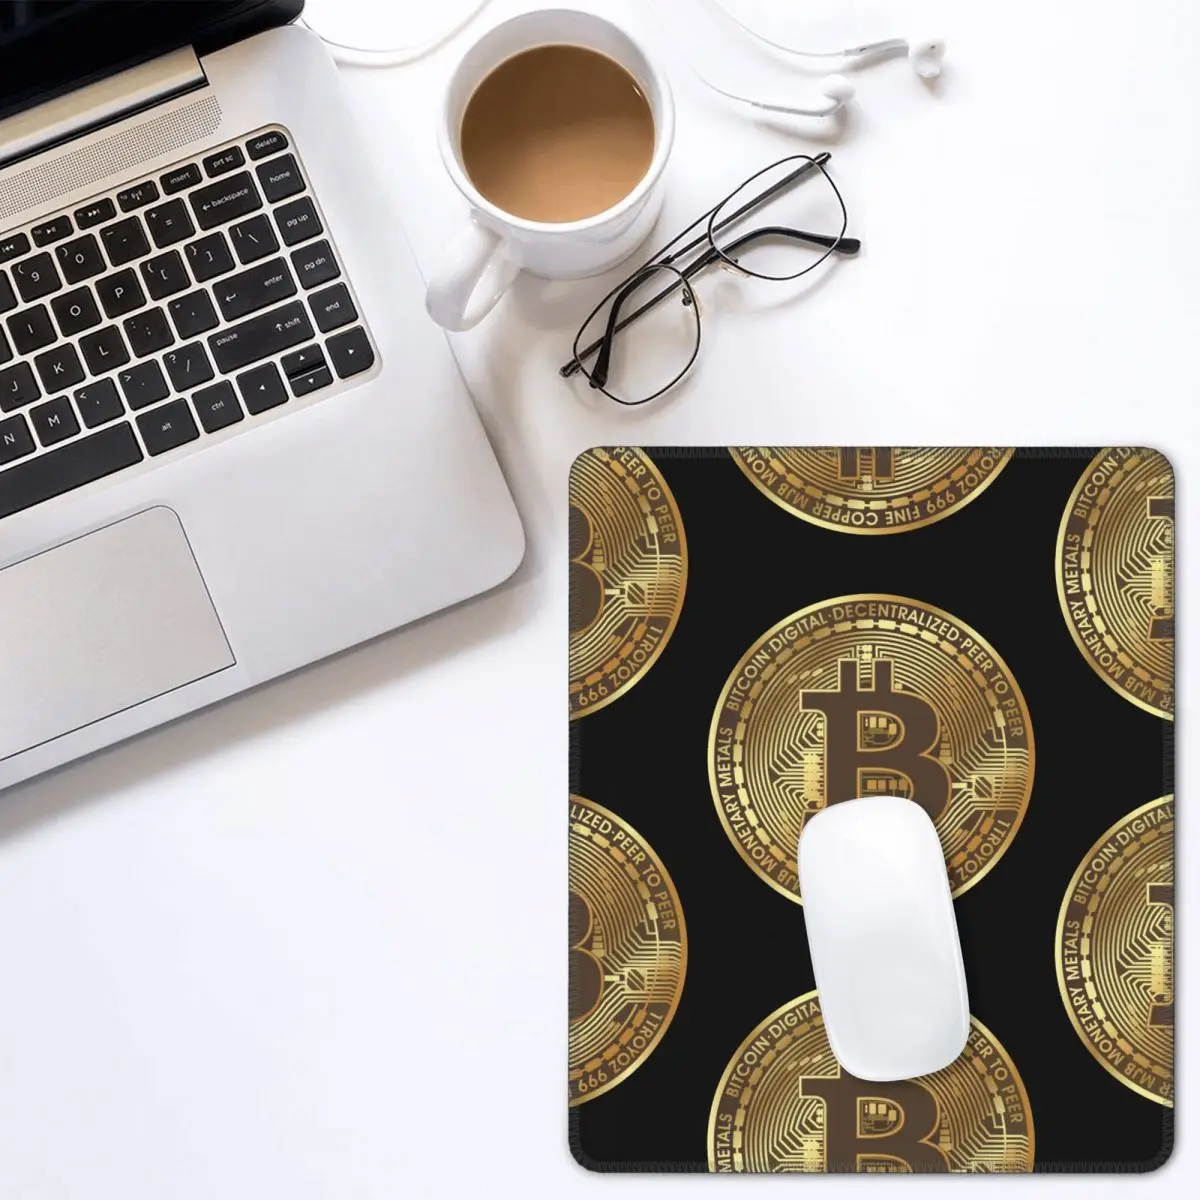 

Bitcoin Awesome Mouse Pad Cryptocurrency Crypto Btc Blockchain Geek Non-Slip MousePad Natural Rubber Gamer Computer Laptop Pad